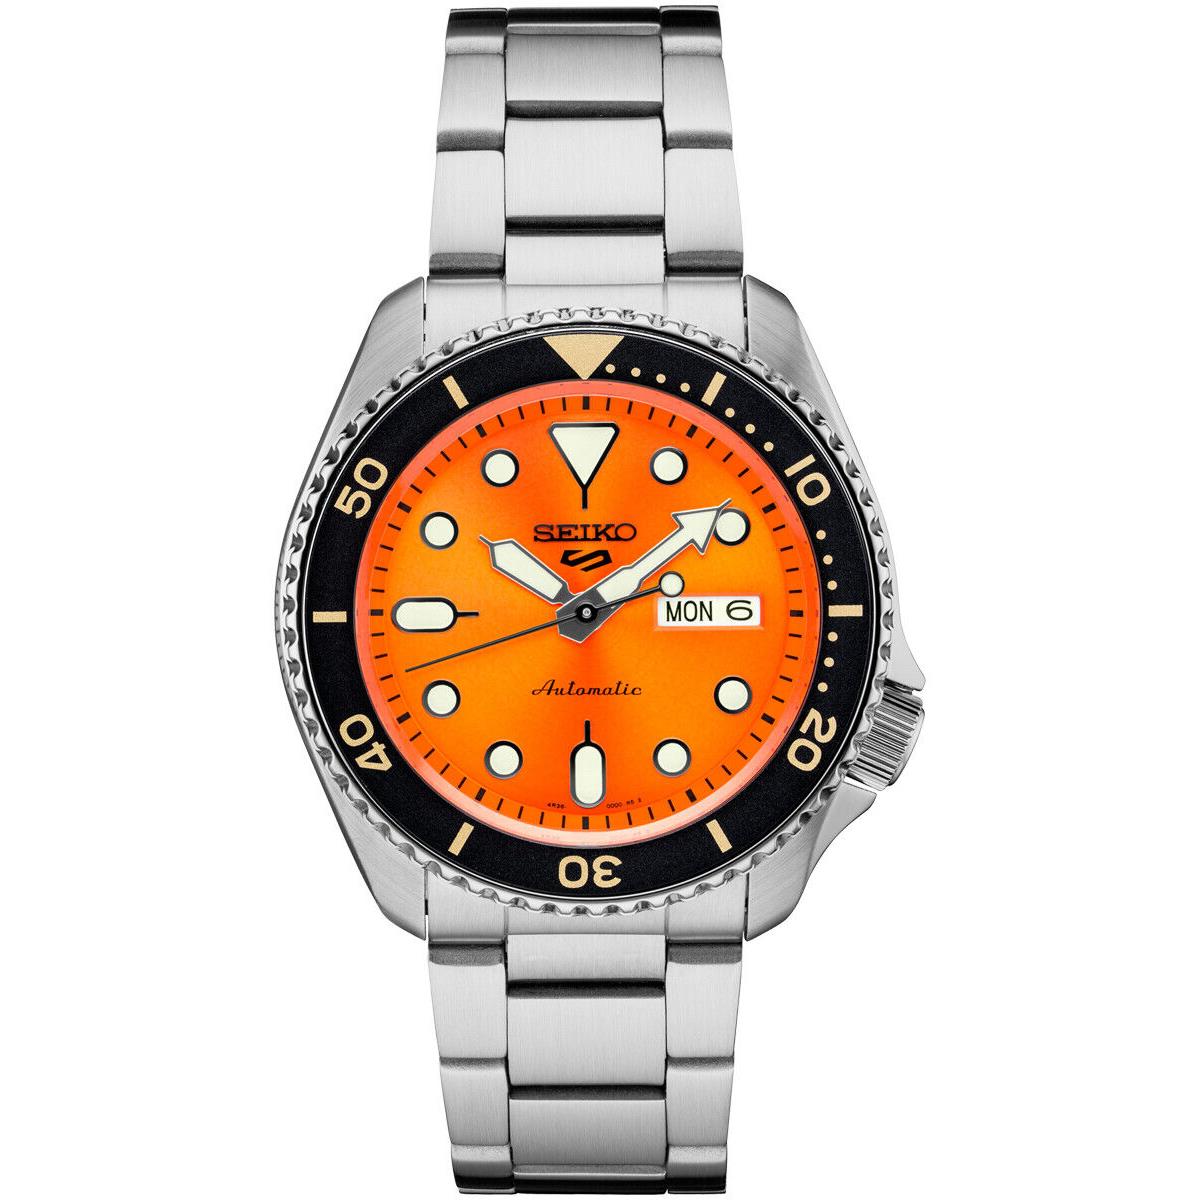 Seiko 5 Sports Automatic Orange Dial Stainless Steel Day/date Men s Watch SRPD59